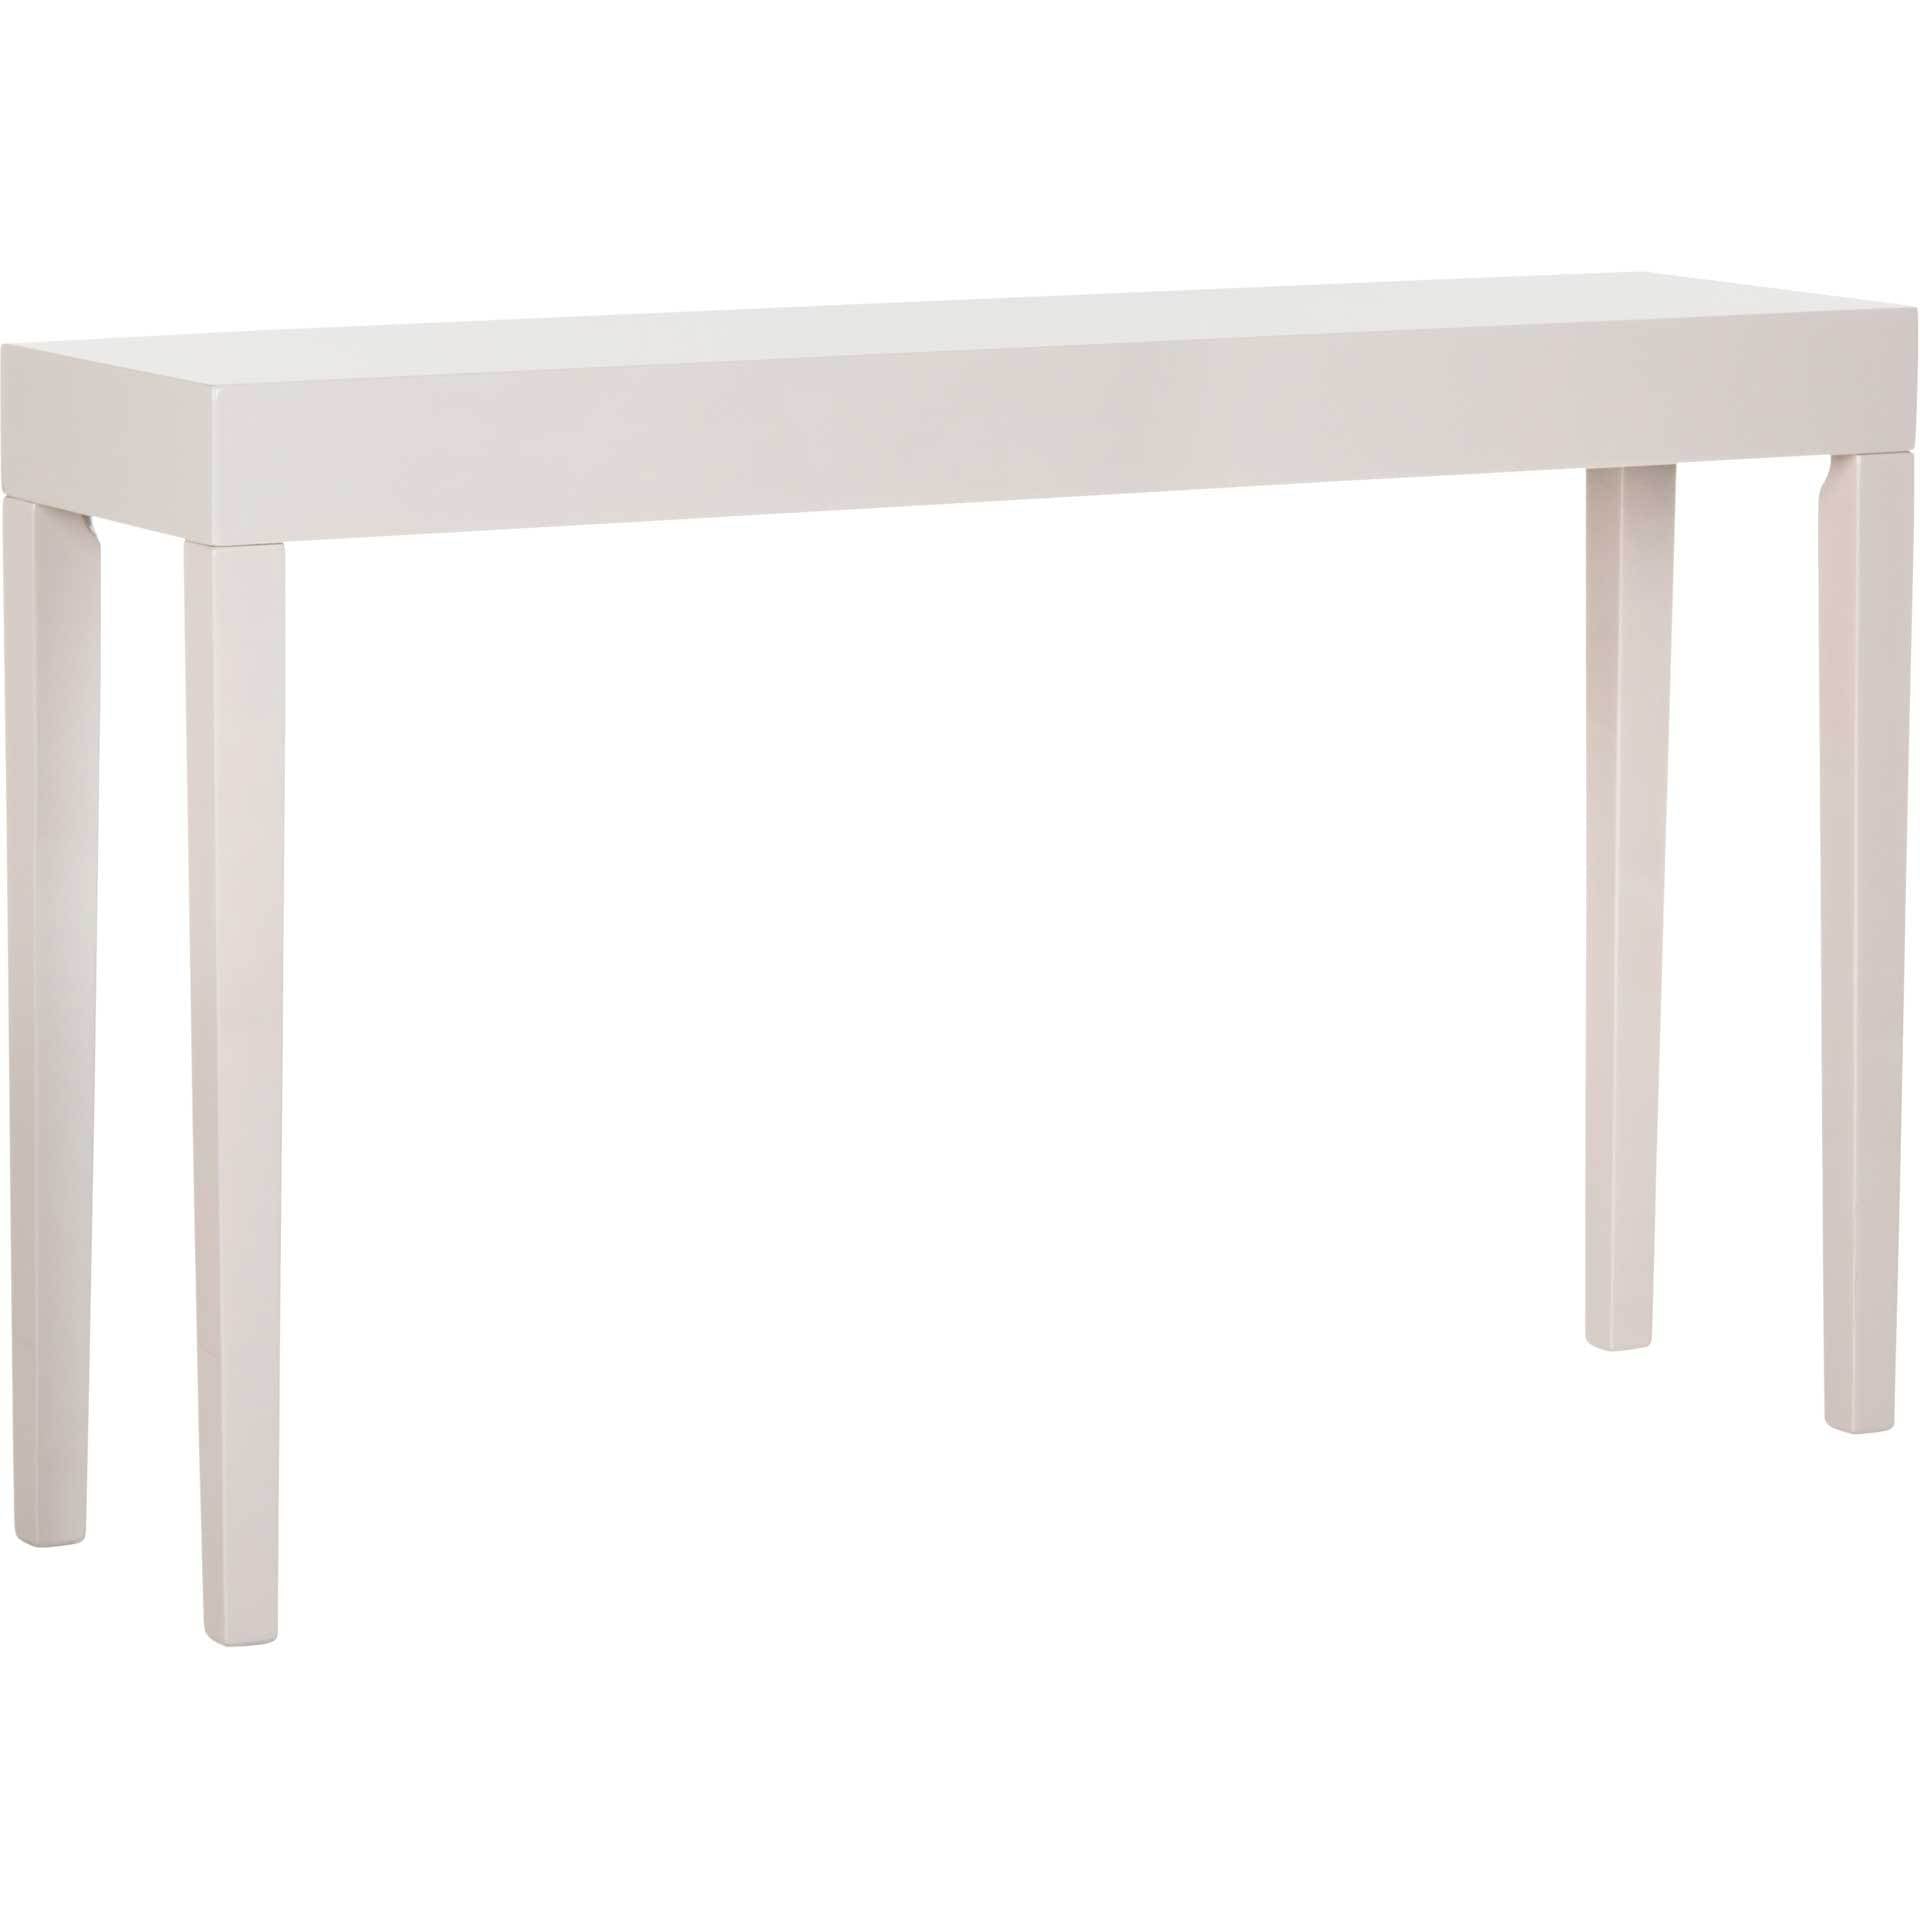 Kasey Lacquer Console Table Gray